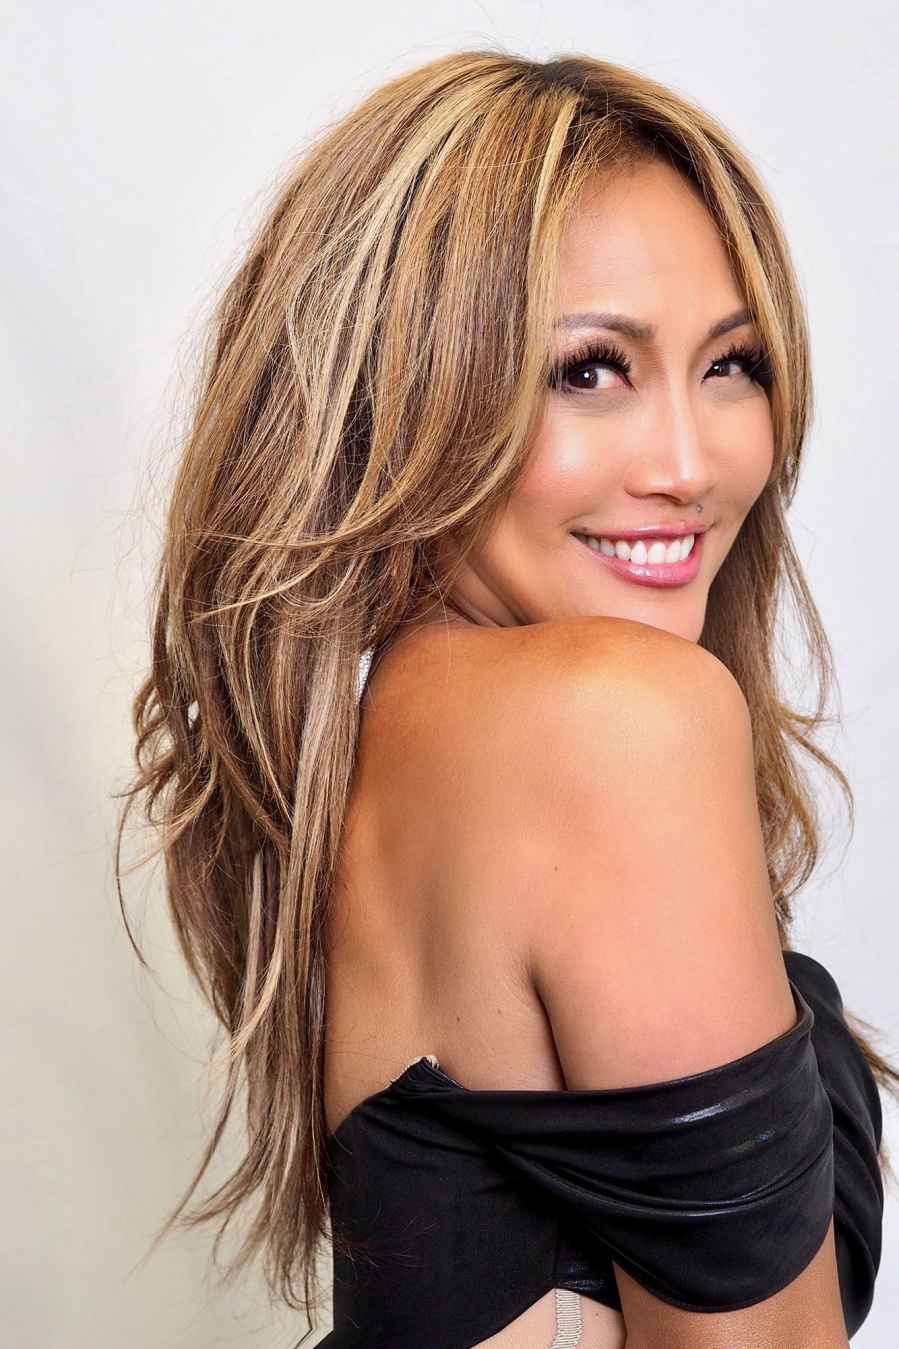 Carrie Ann Inaba Didn’t Shy Away From a Slinky Dress on DWTS After 18 Lb Weight Loss